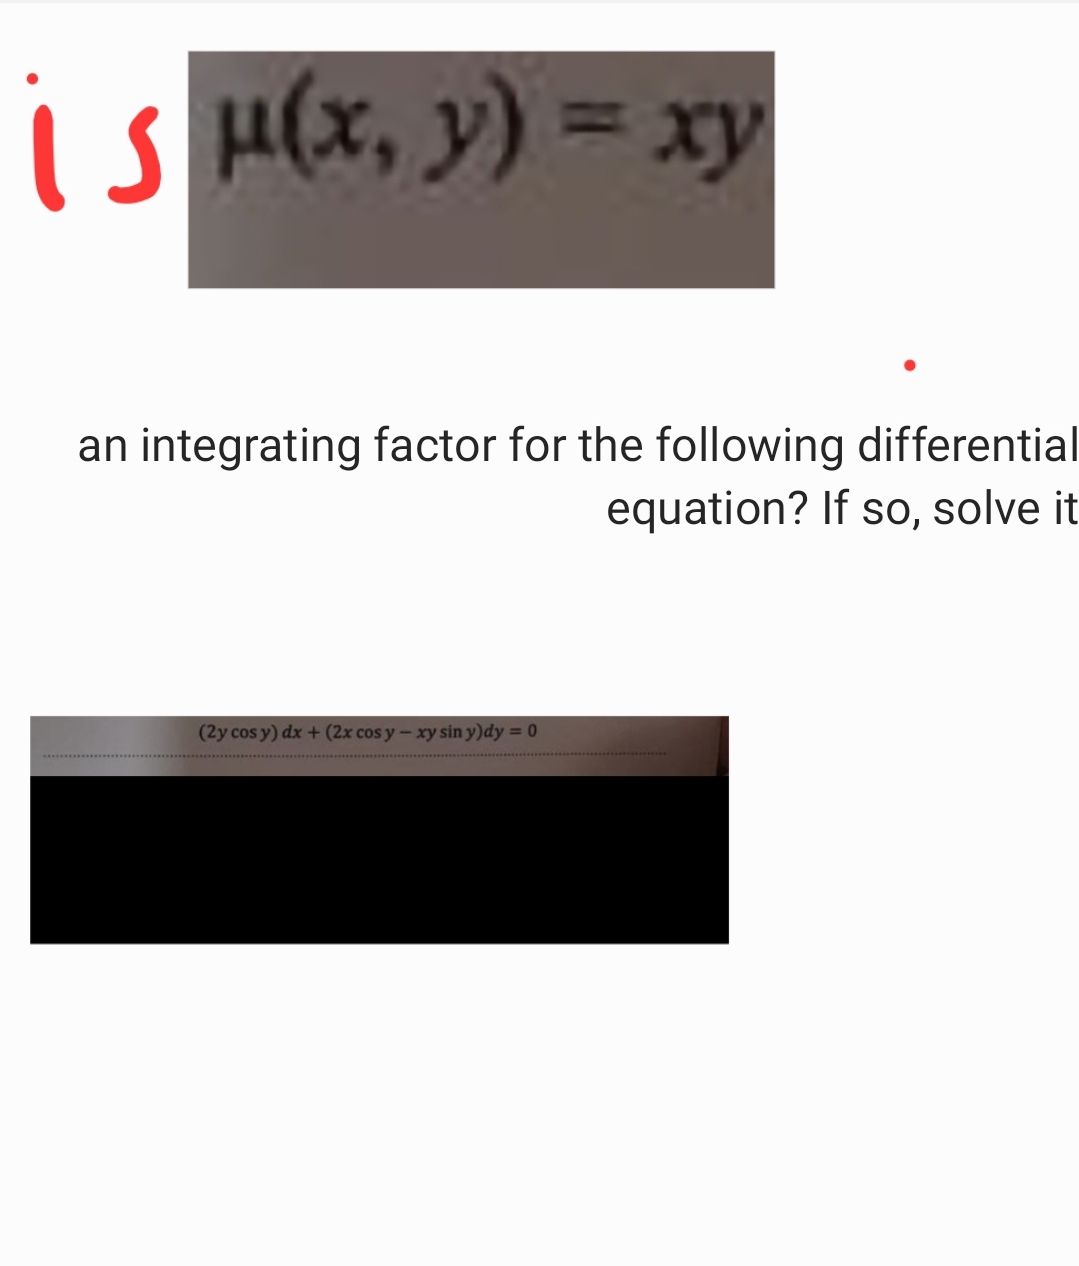 is μ(x, y) = xy
an integrating factor for the following differential
(2y cos y) dx + (2x cos y - xy sin y)dy = 0
equation? If so, solve it